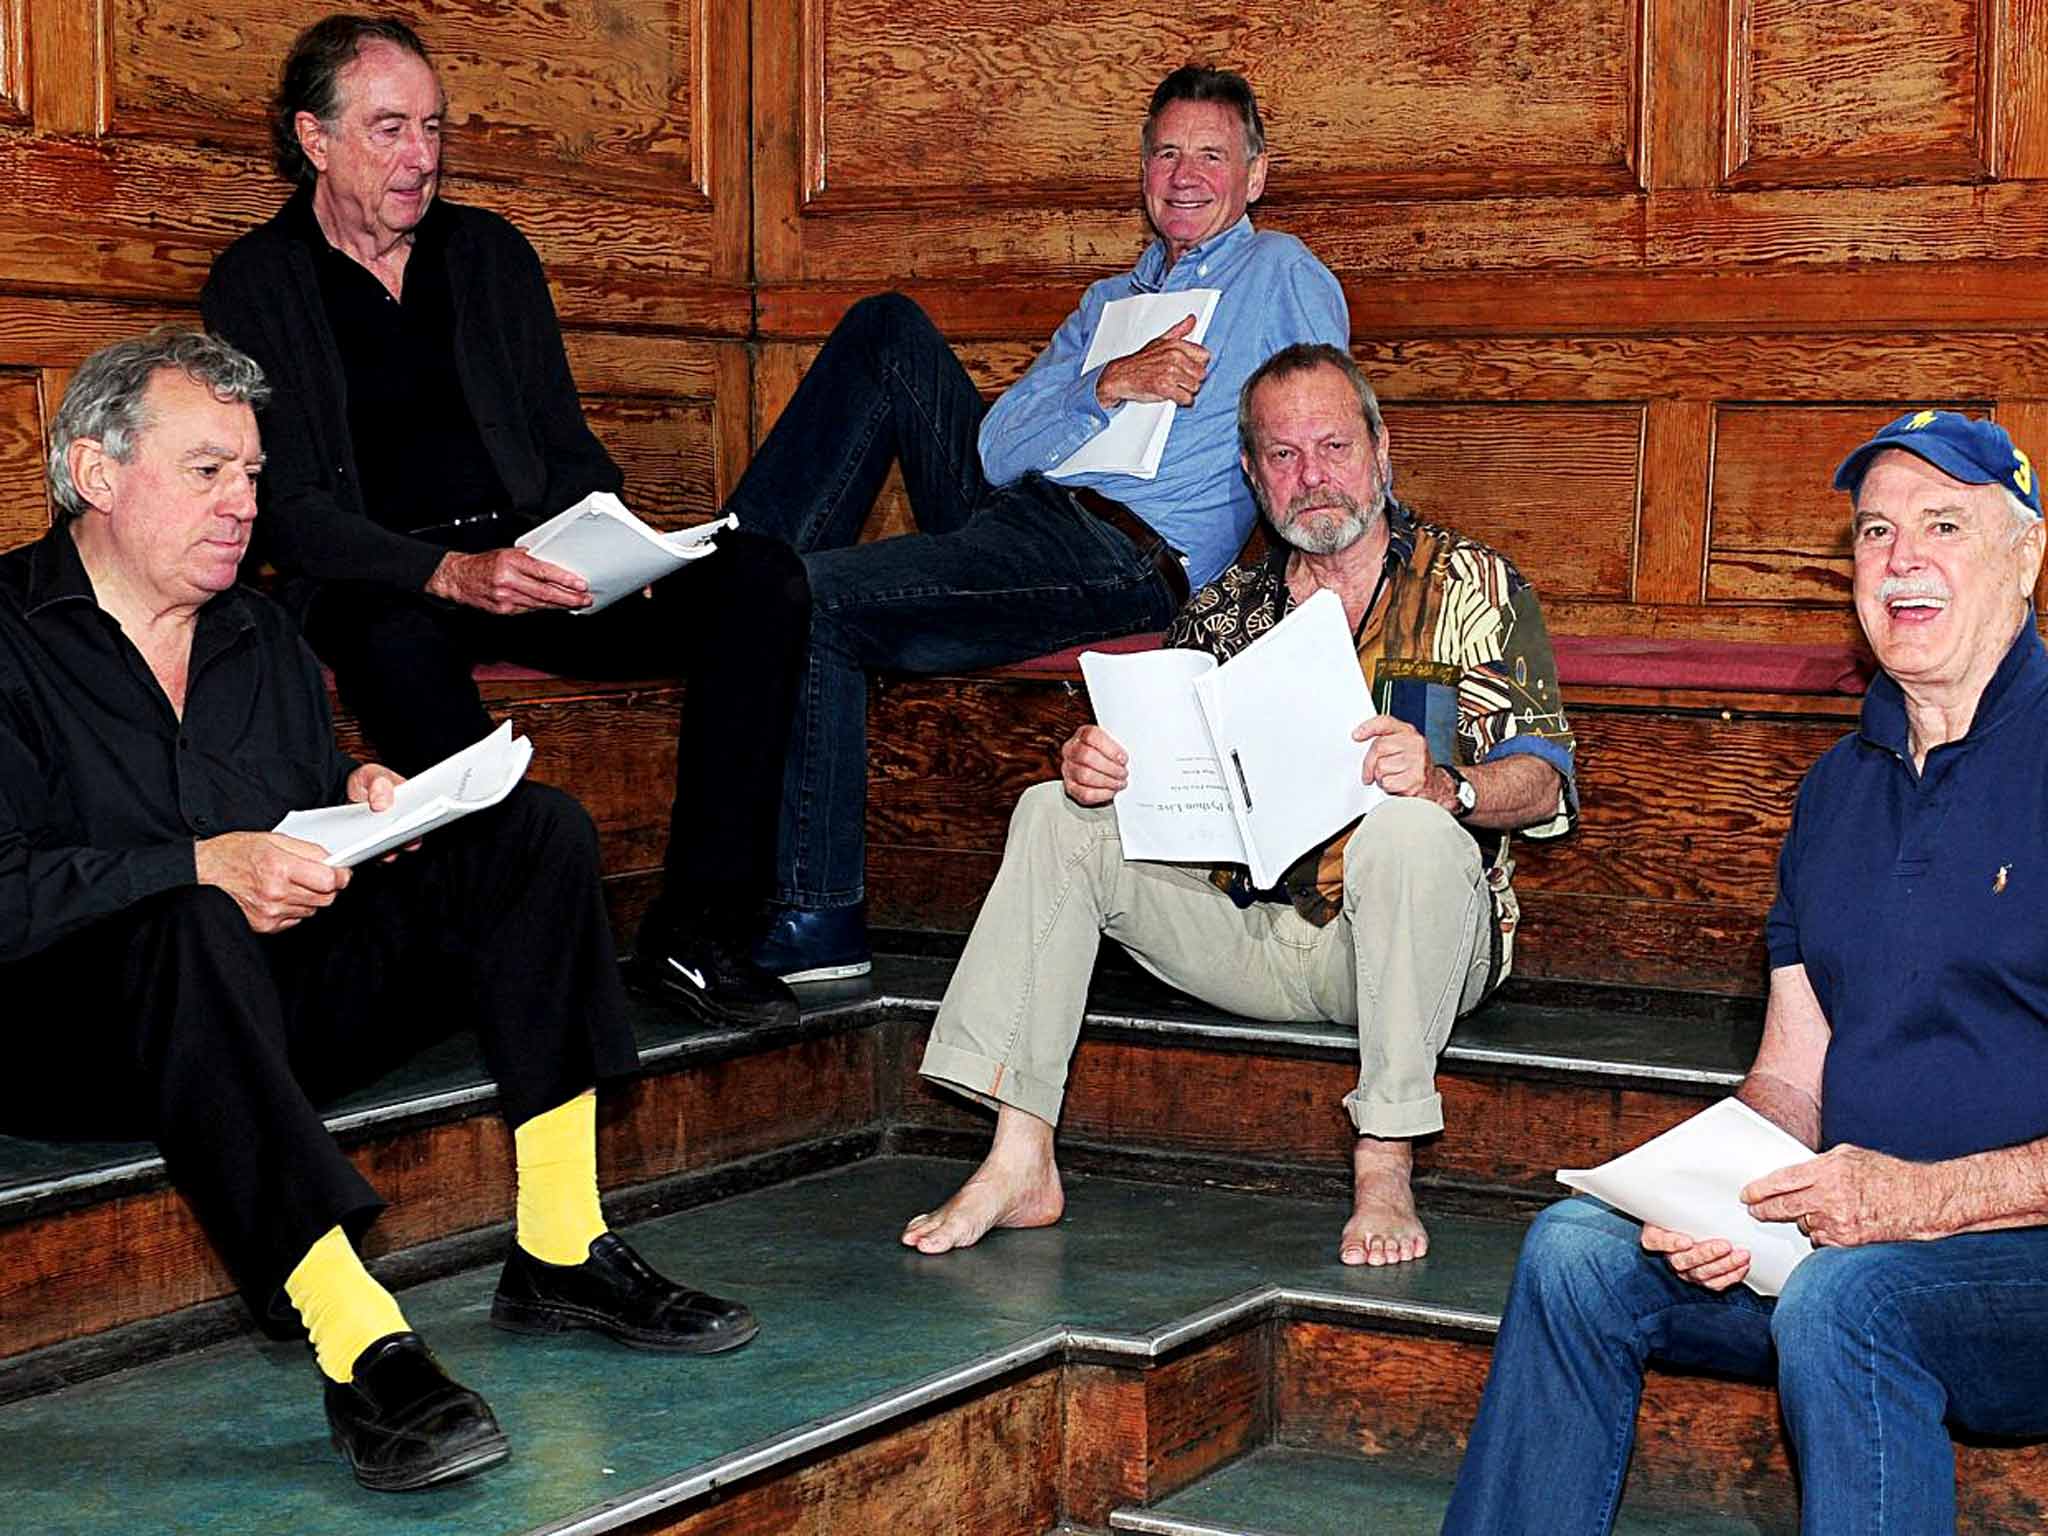 Terry Jones, Eric Idle, Michael Palin, Terry Gilliam and John Cleese in rehearsals for the London show